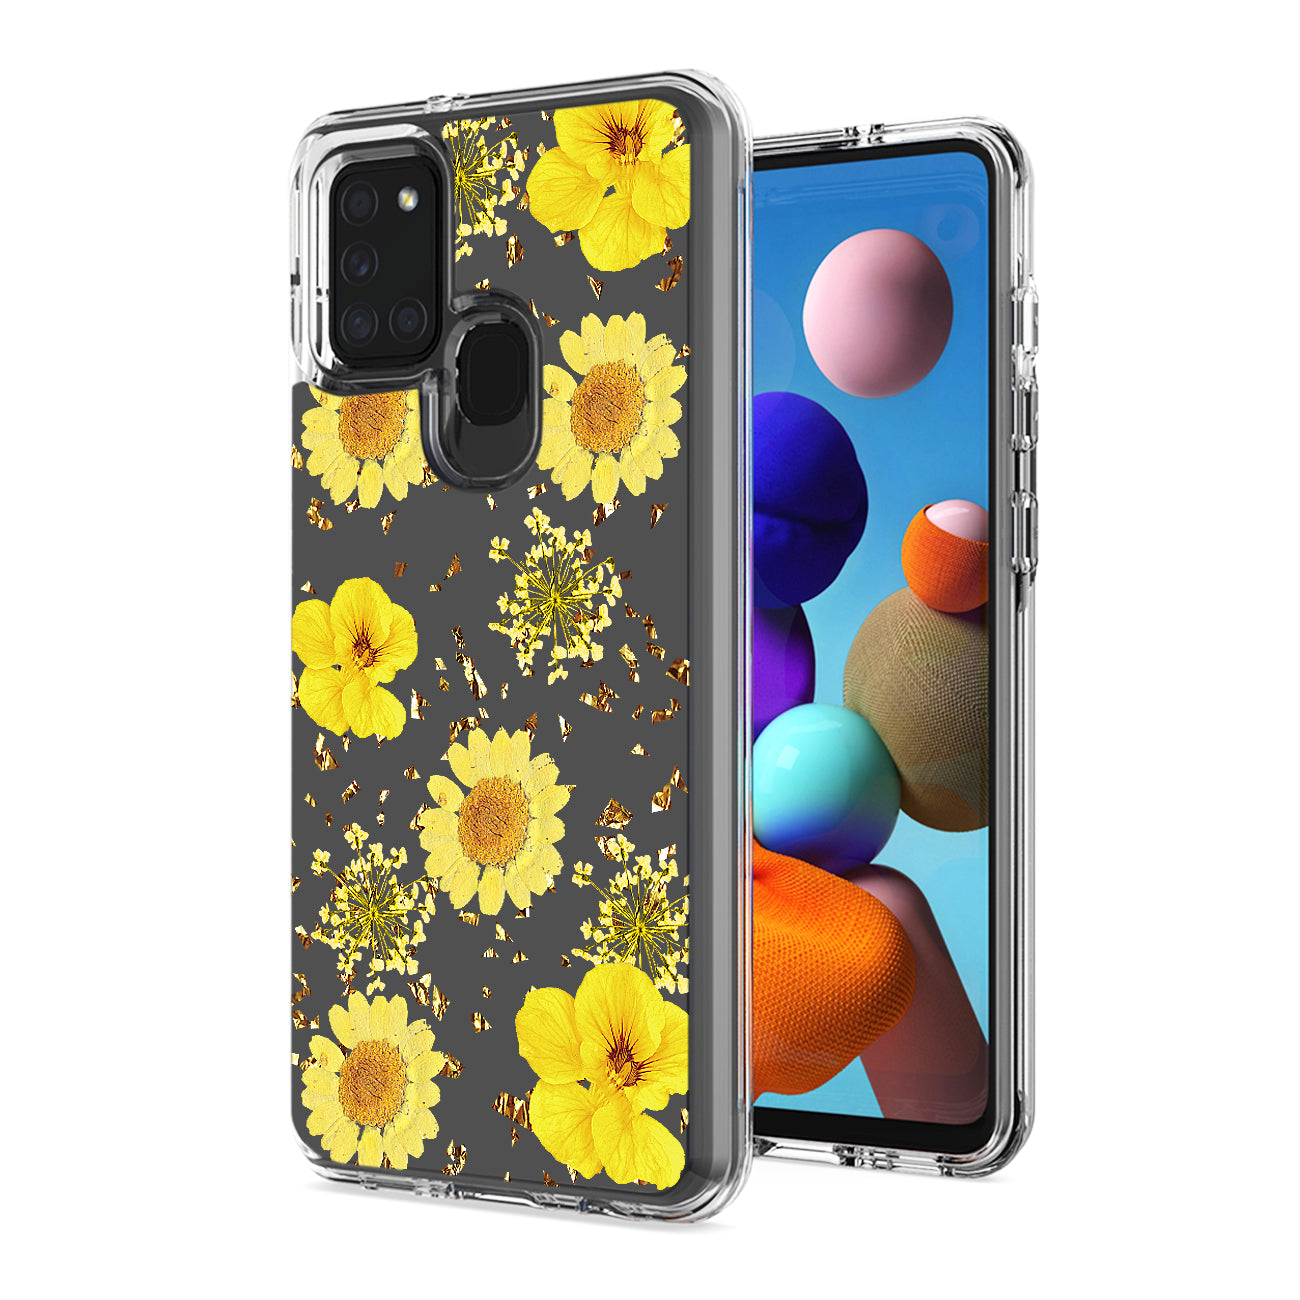 Pressed dried flower Design Phone case for SAMSUNG GALAXY A21S In Yellow